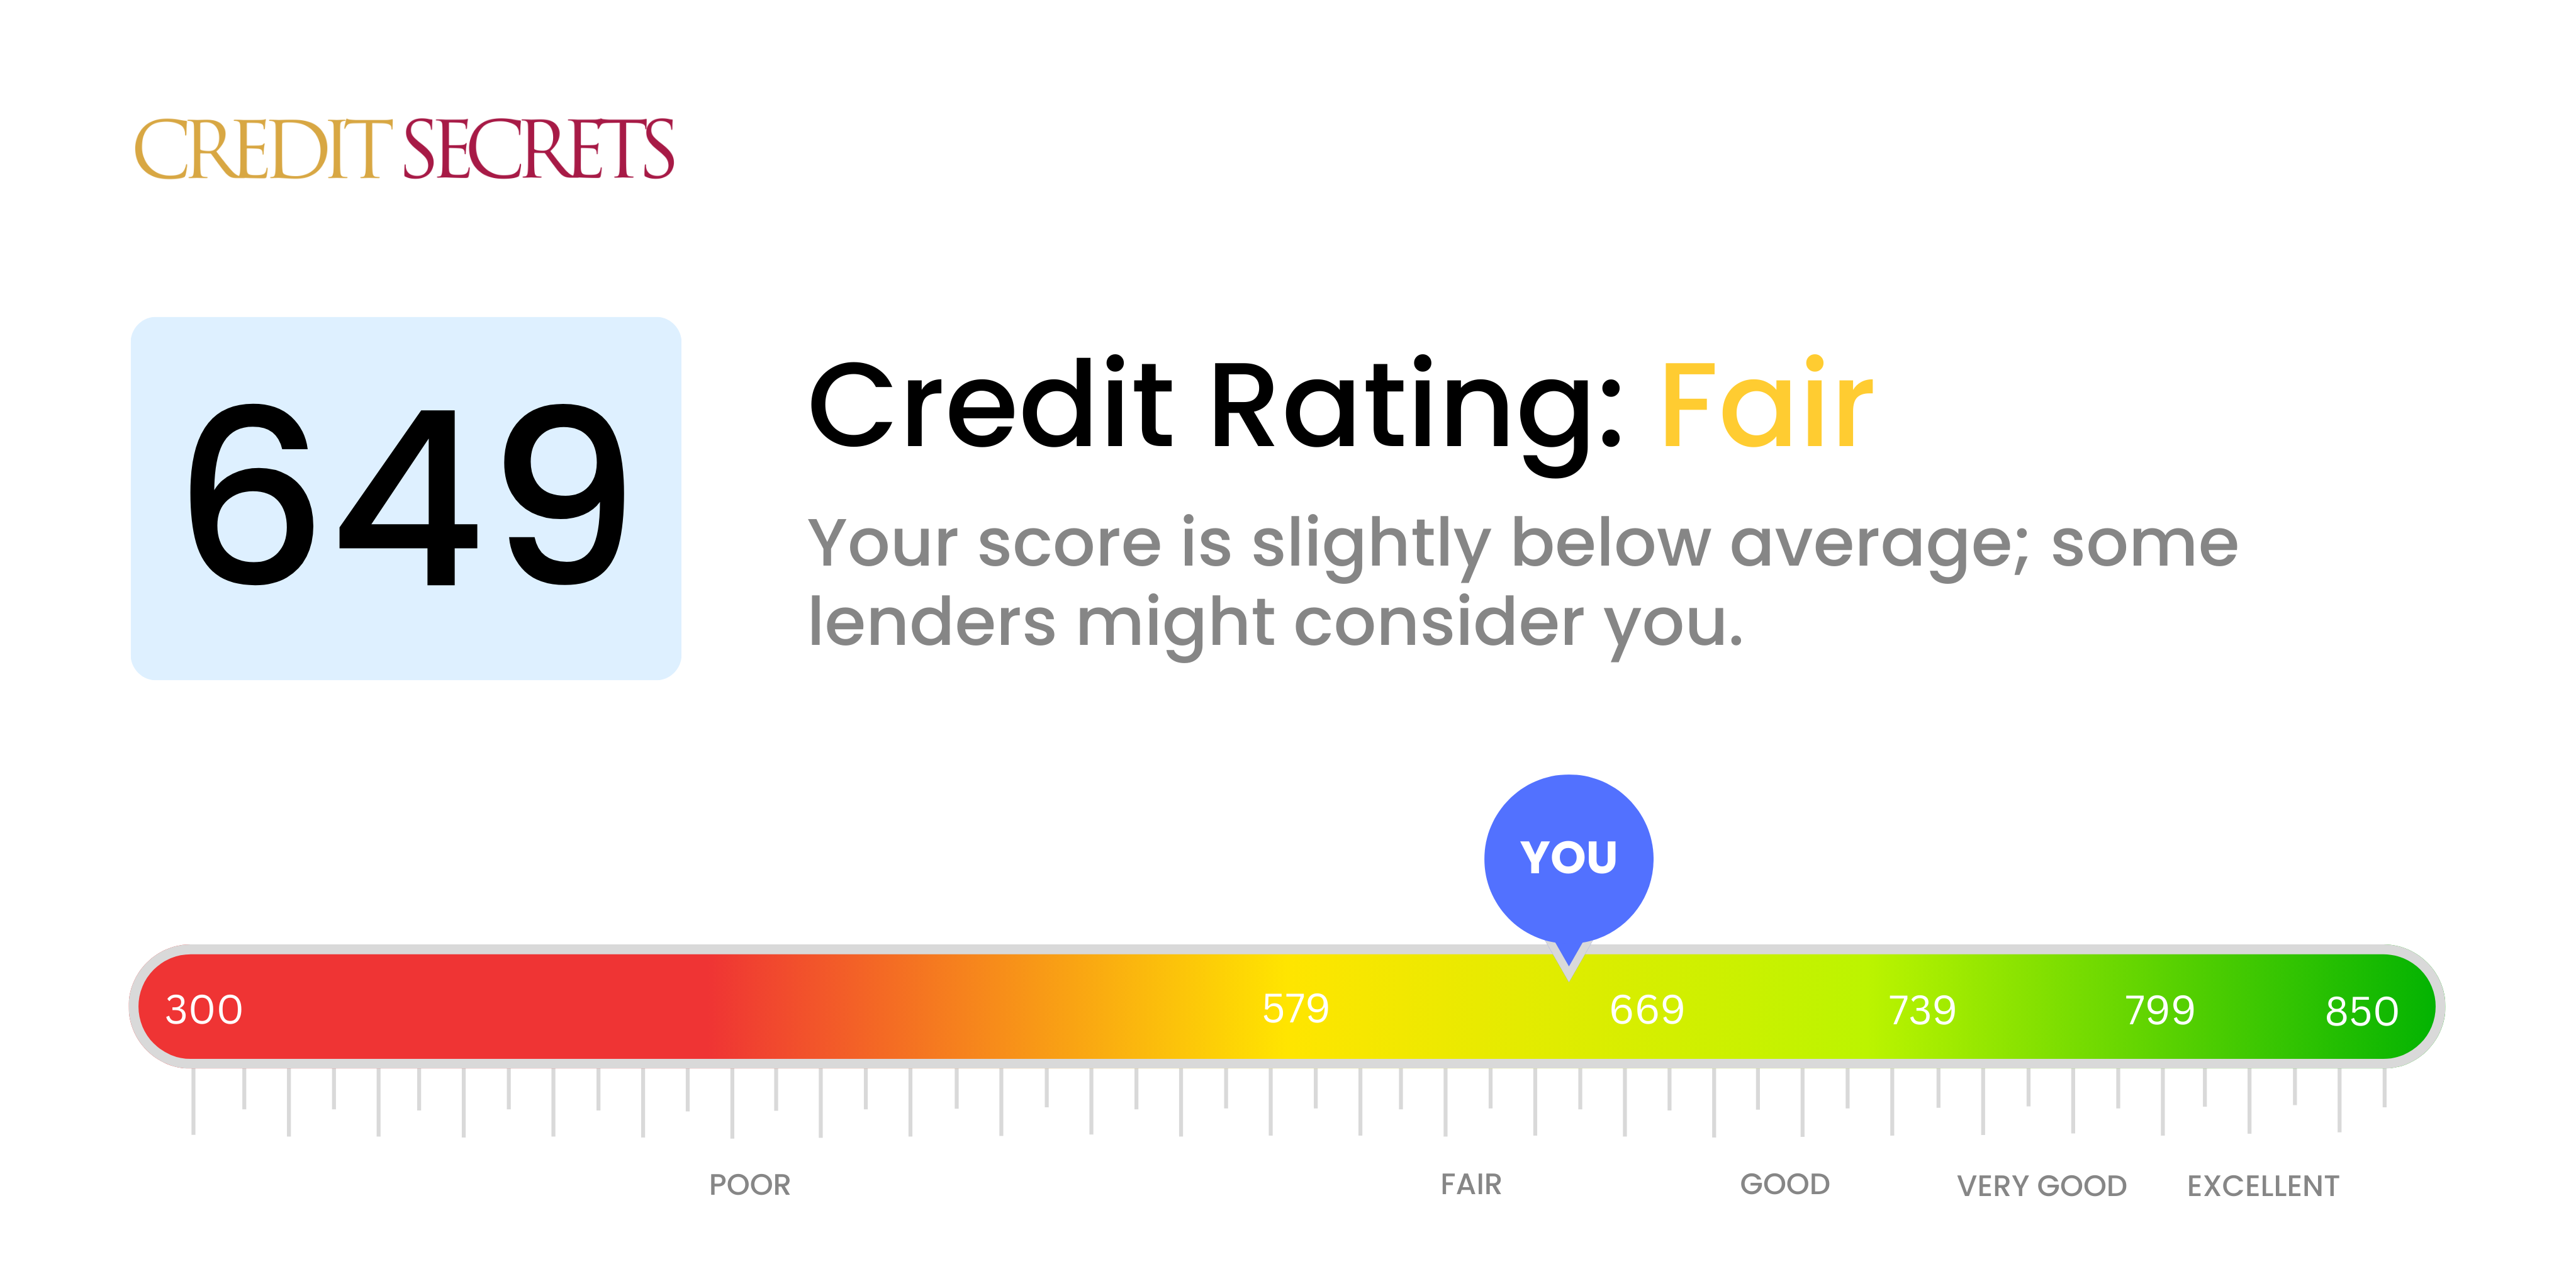 Is 649 a good credit score?